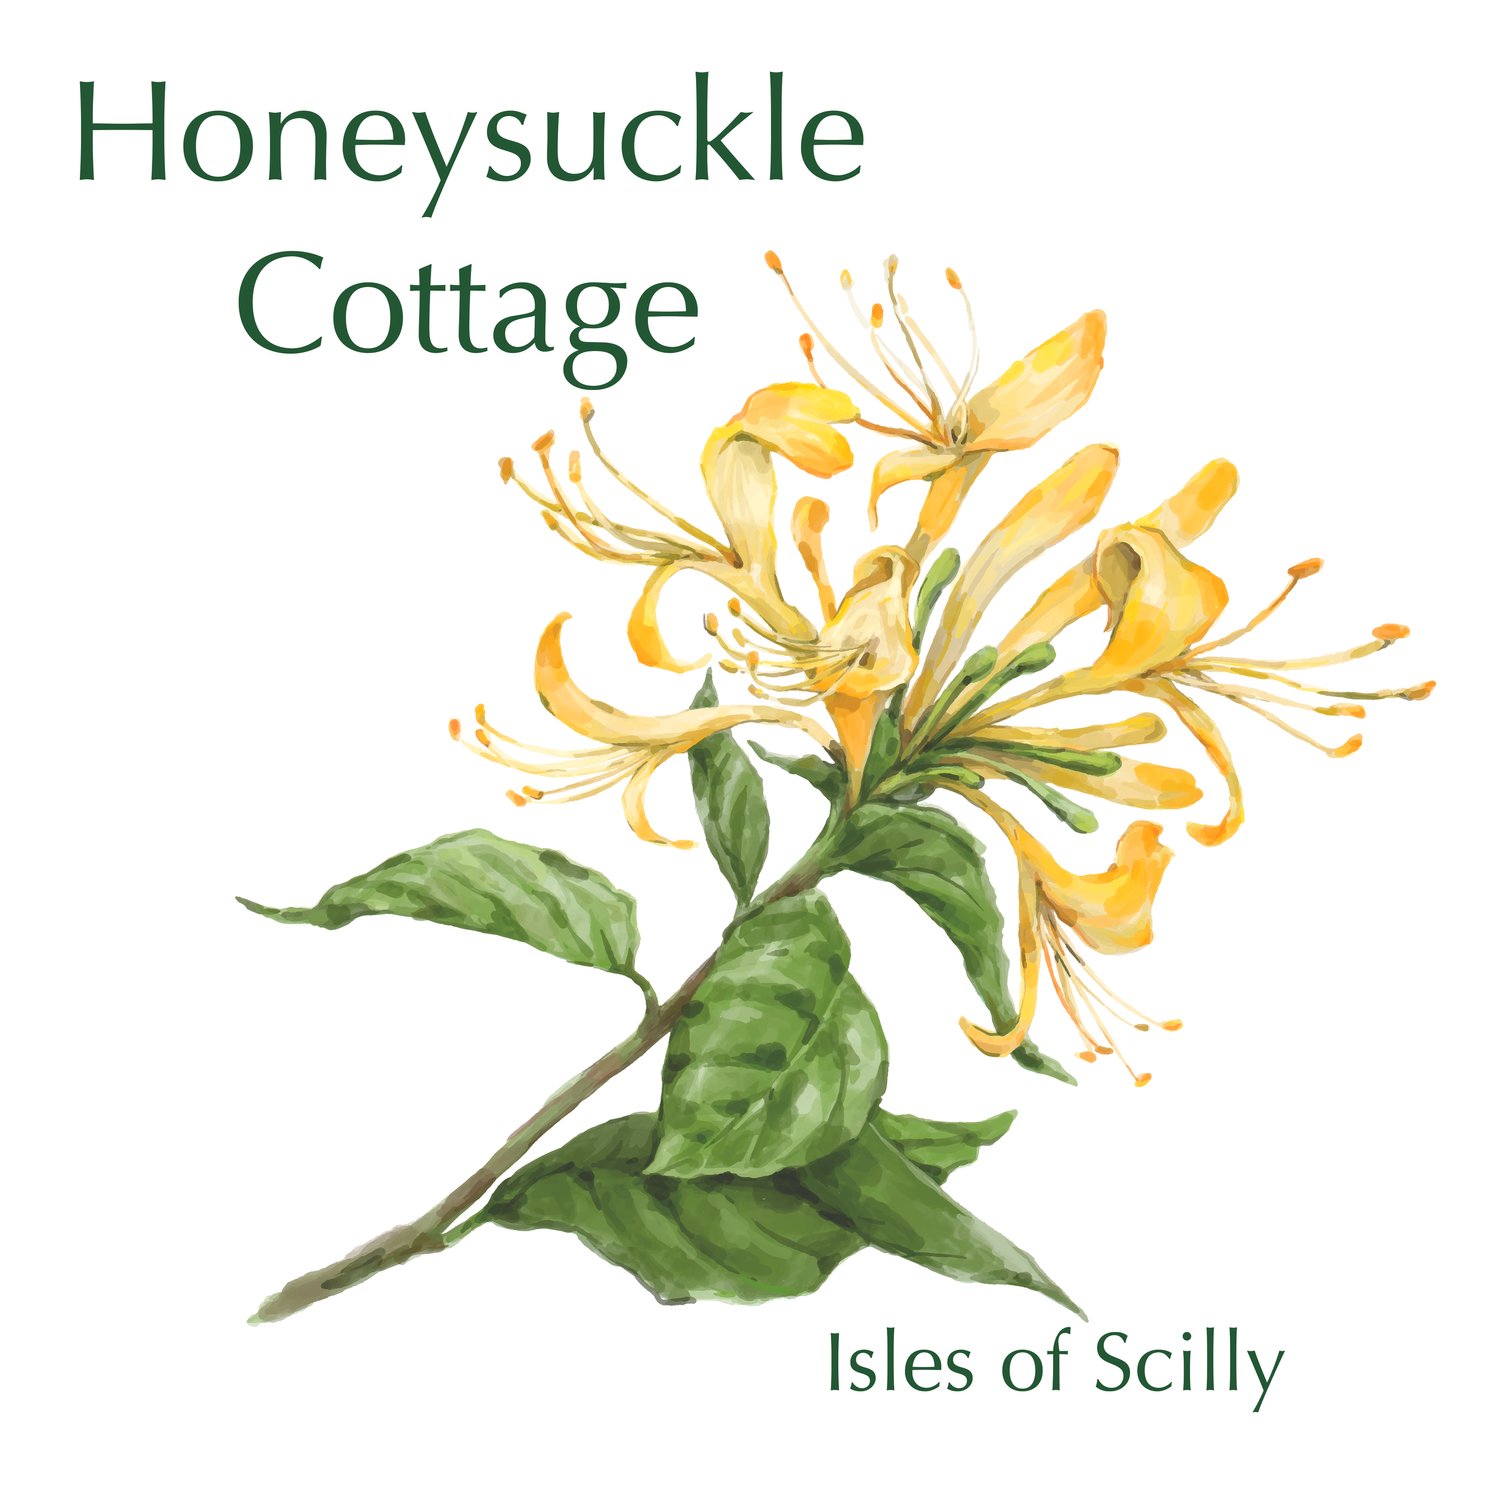 Honeysuckle Cottage - Isles of Scilly